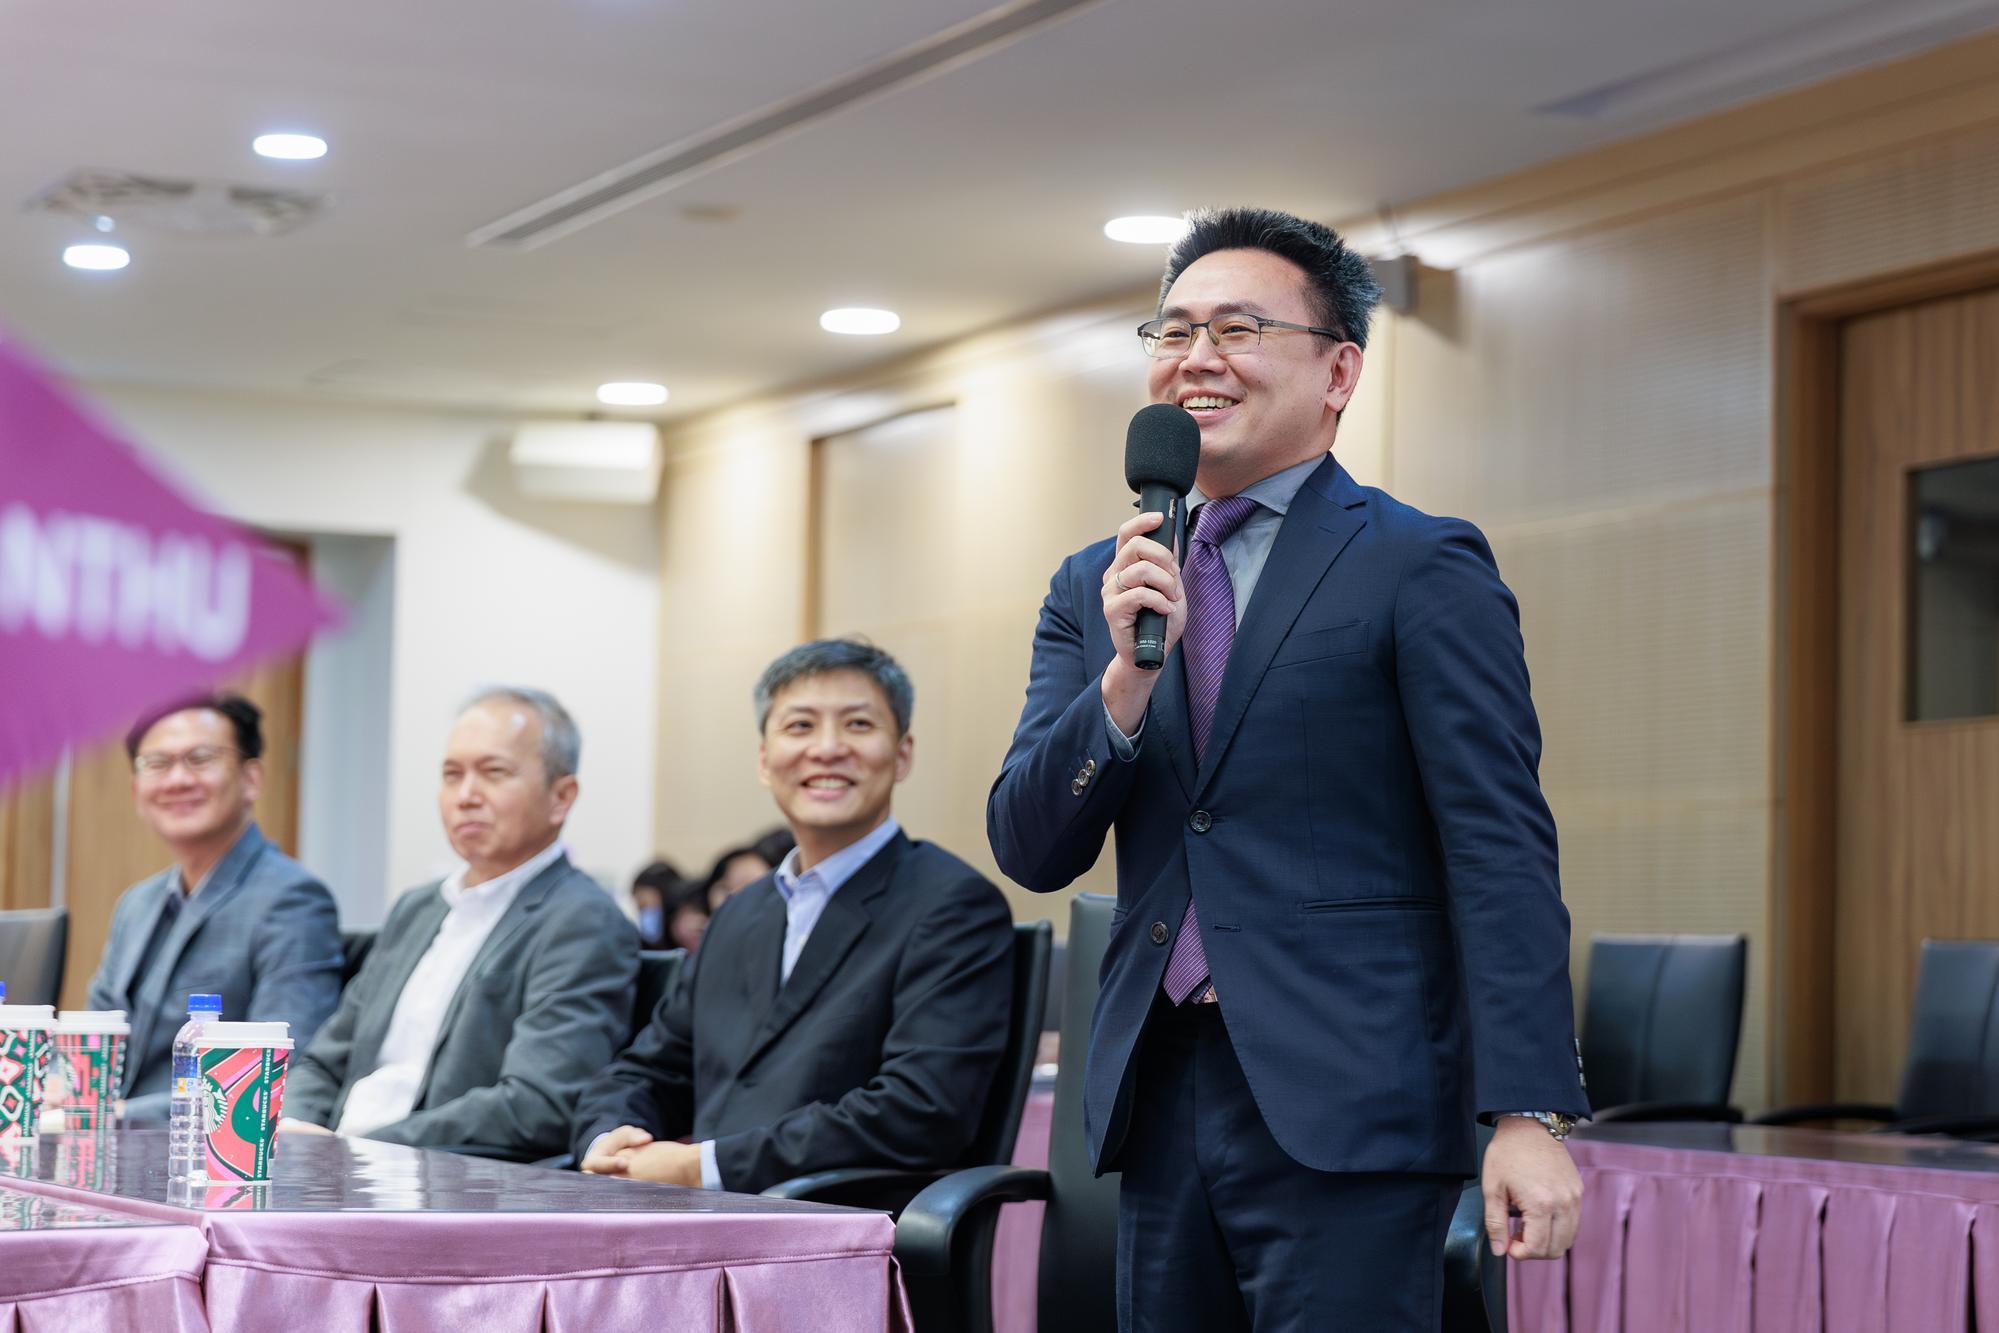 Ethan Hsiao (蕭怡祺), Director, NVIDIA and an alumnus of NTHU’s Institute of Technology Management, expresses delight in seeing his alma mater collaborating with NVIDIA.